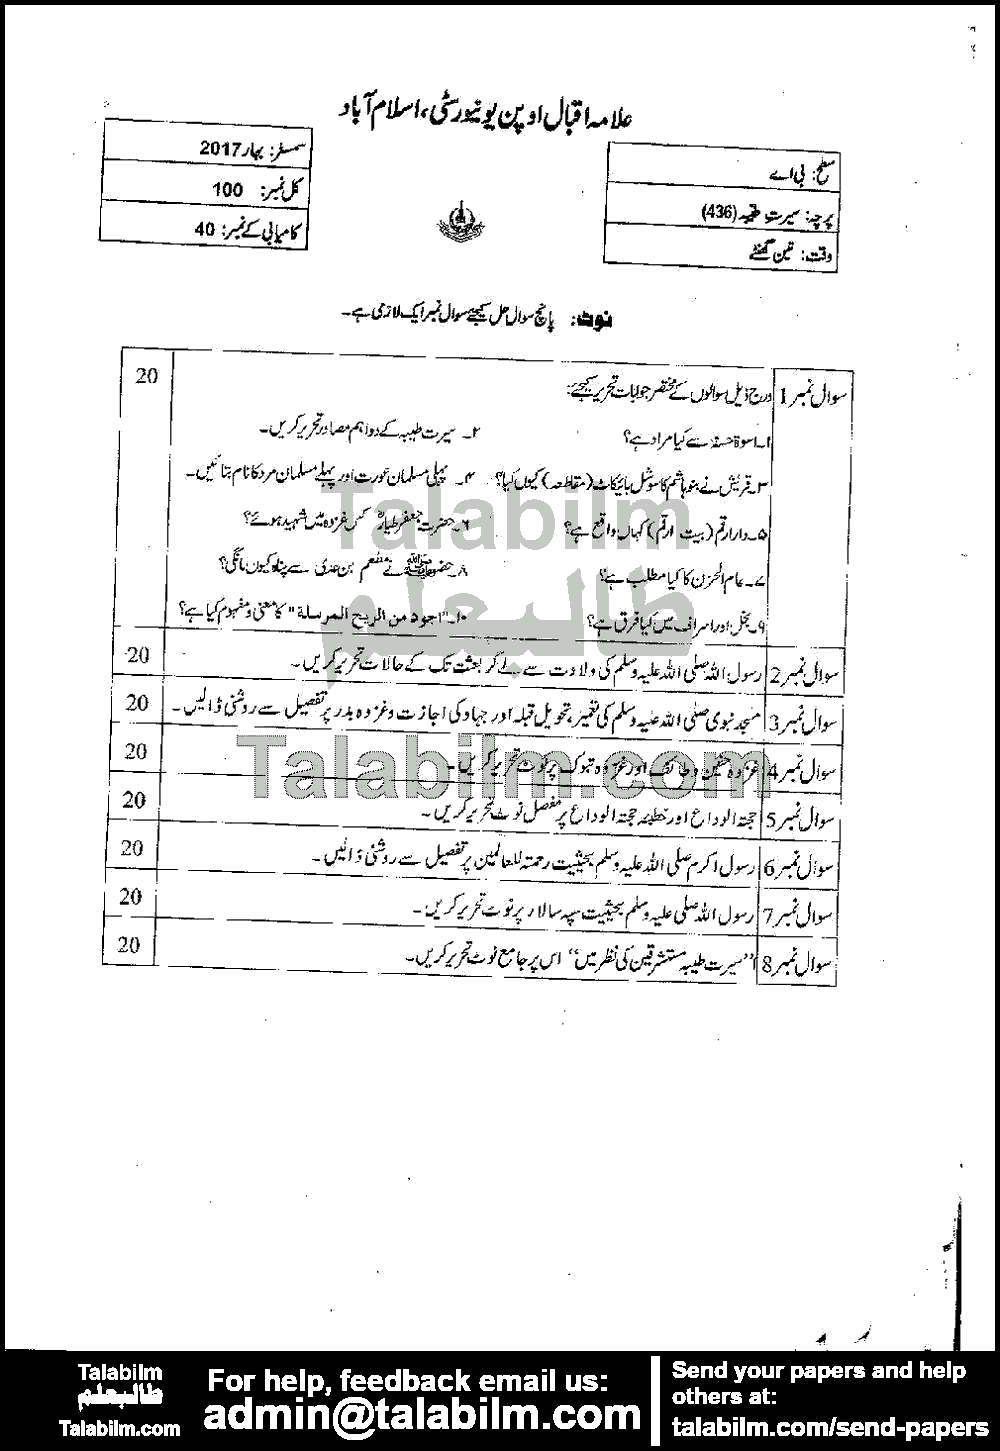 Seerat-e-Tayyaba 436 past paper for Spring 2017